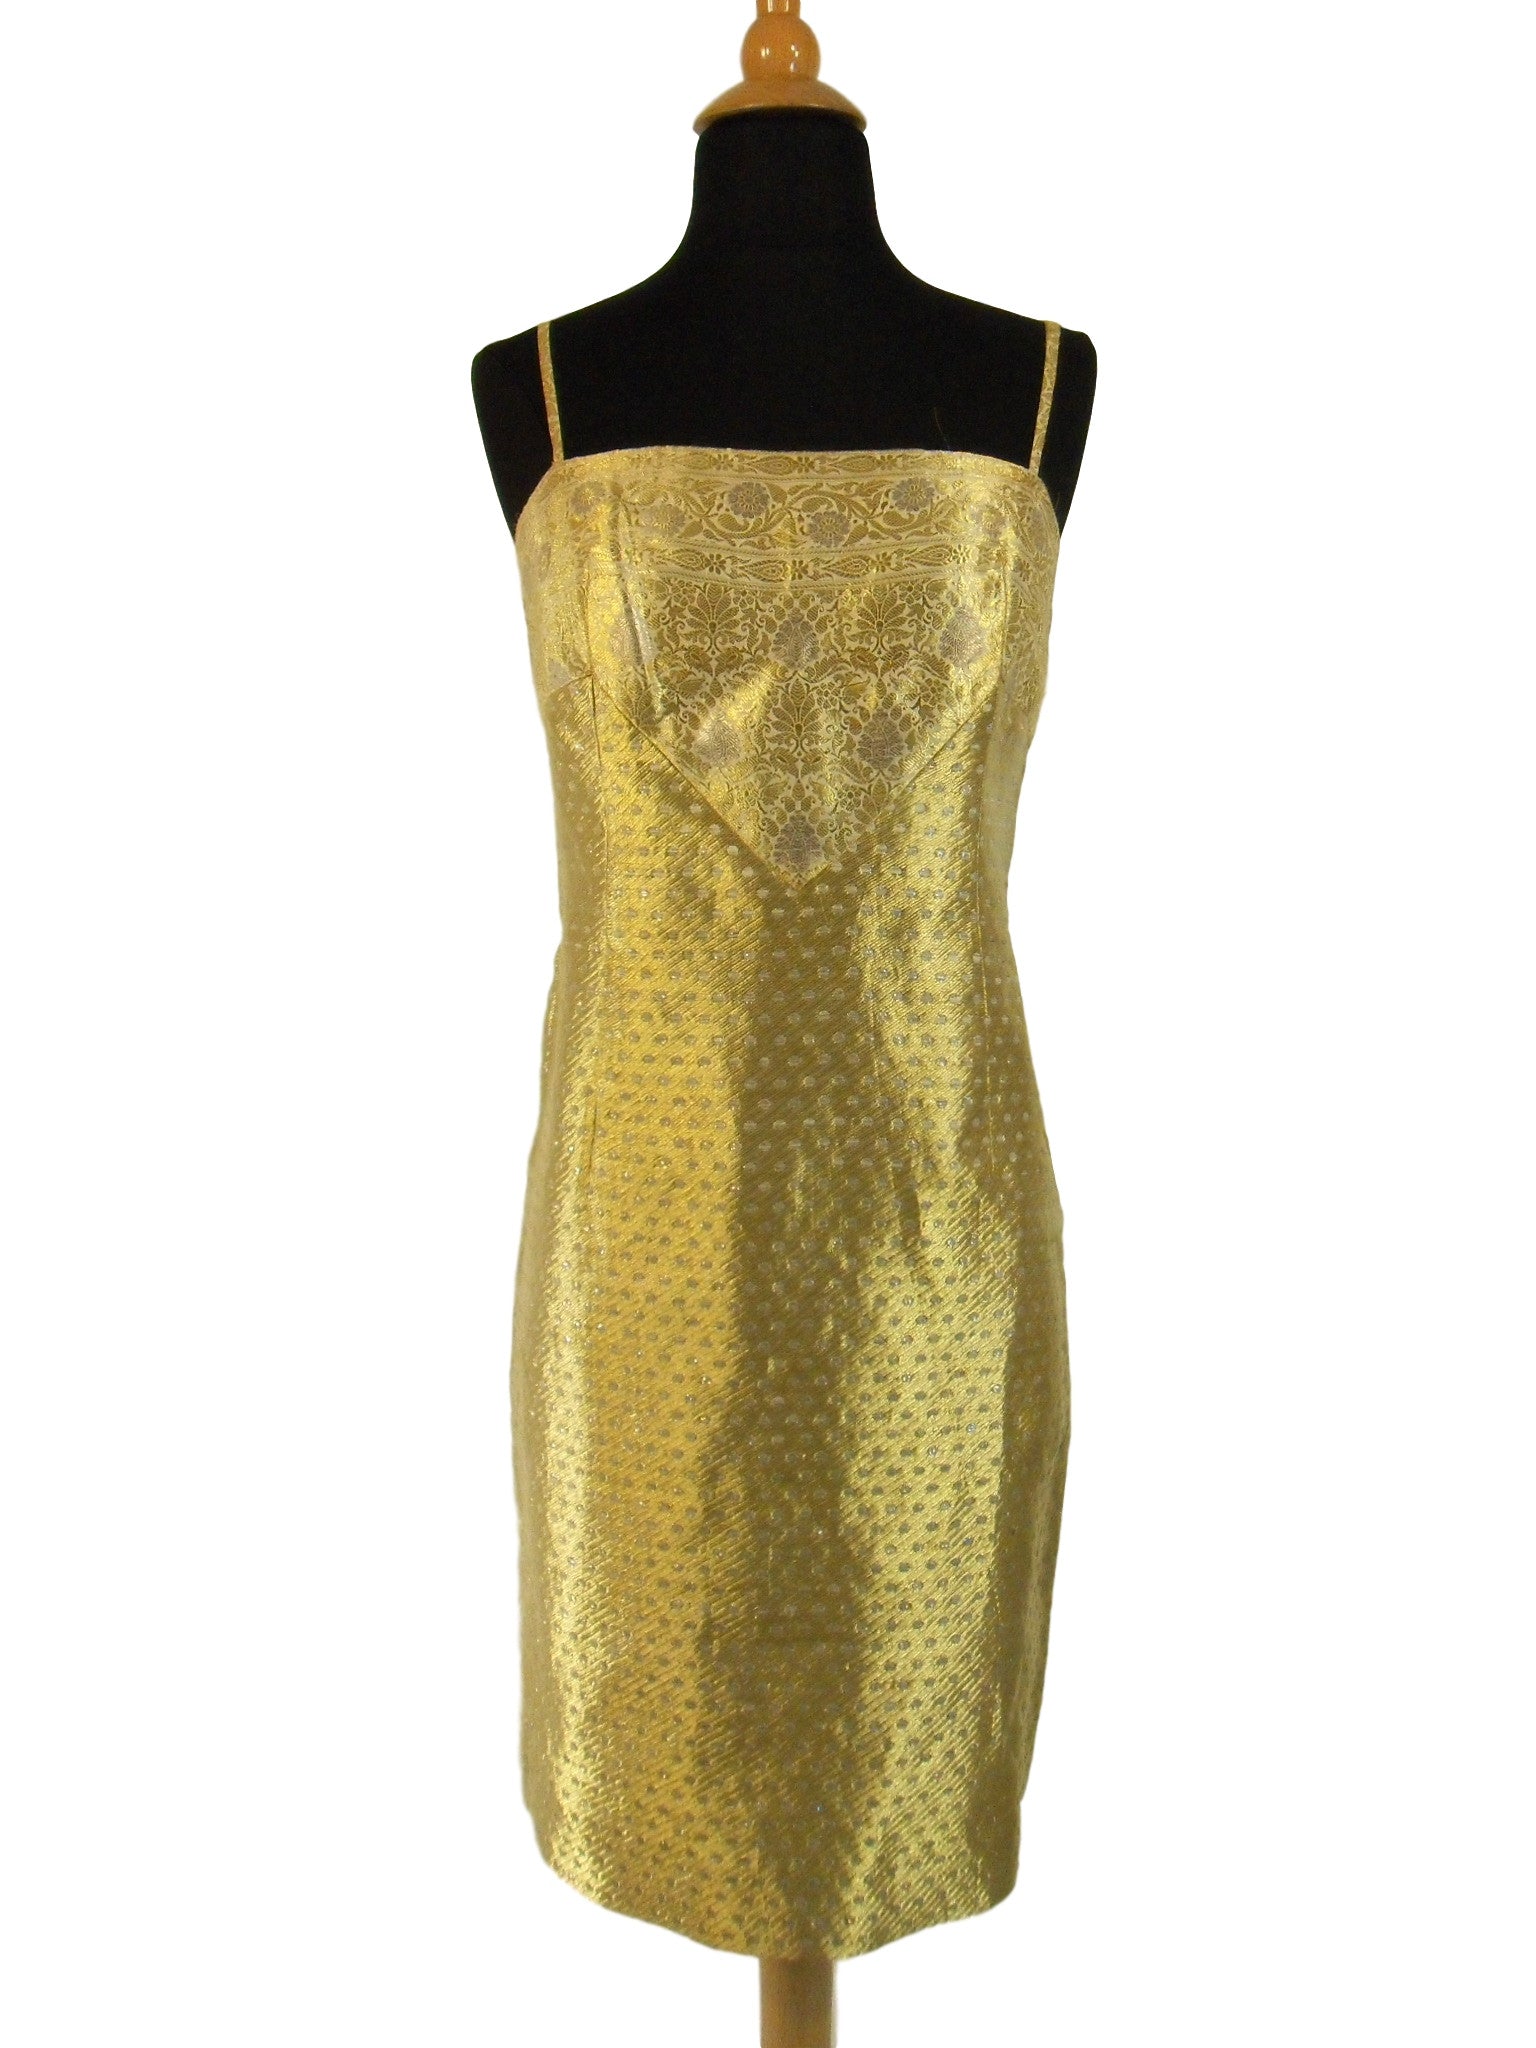 Vintage 50s Shift Dress in Gold Metallic Brocade by Adele Simpson ...